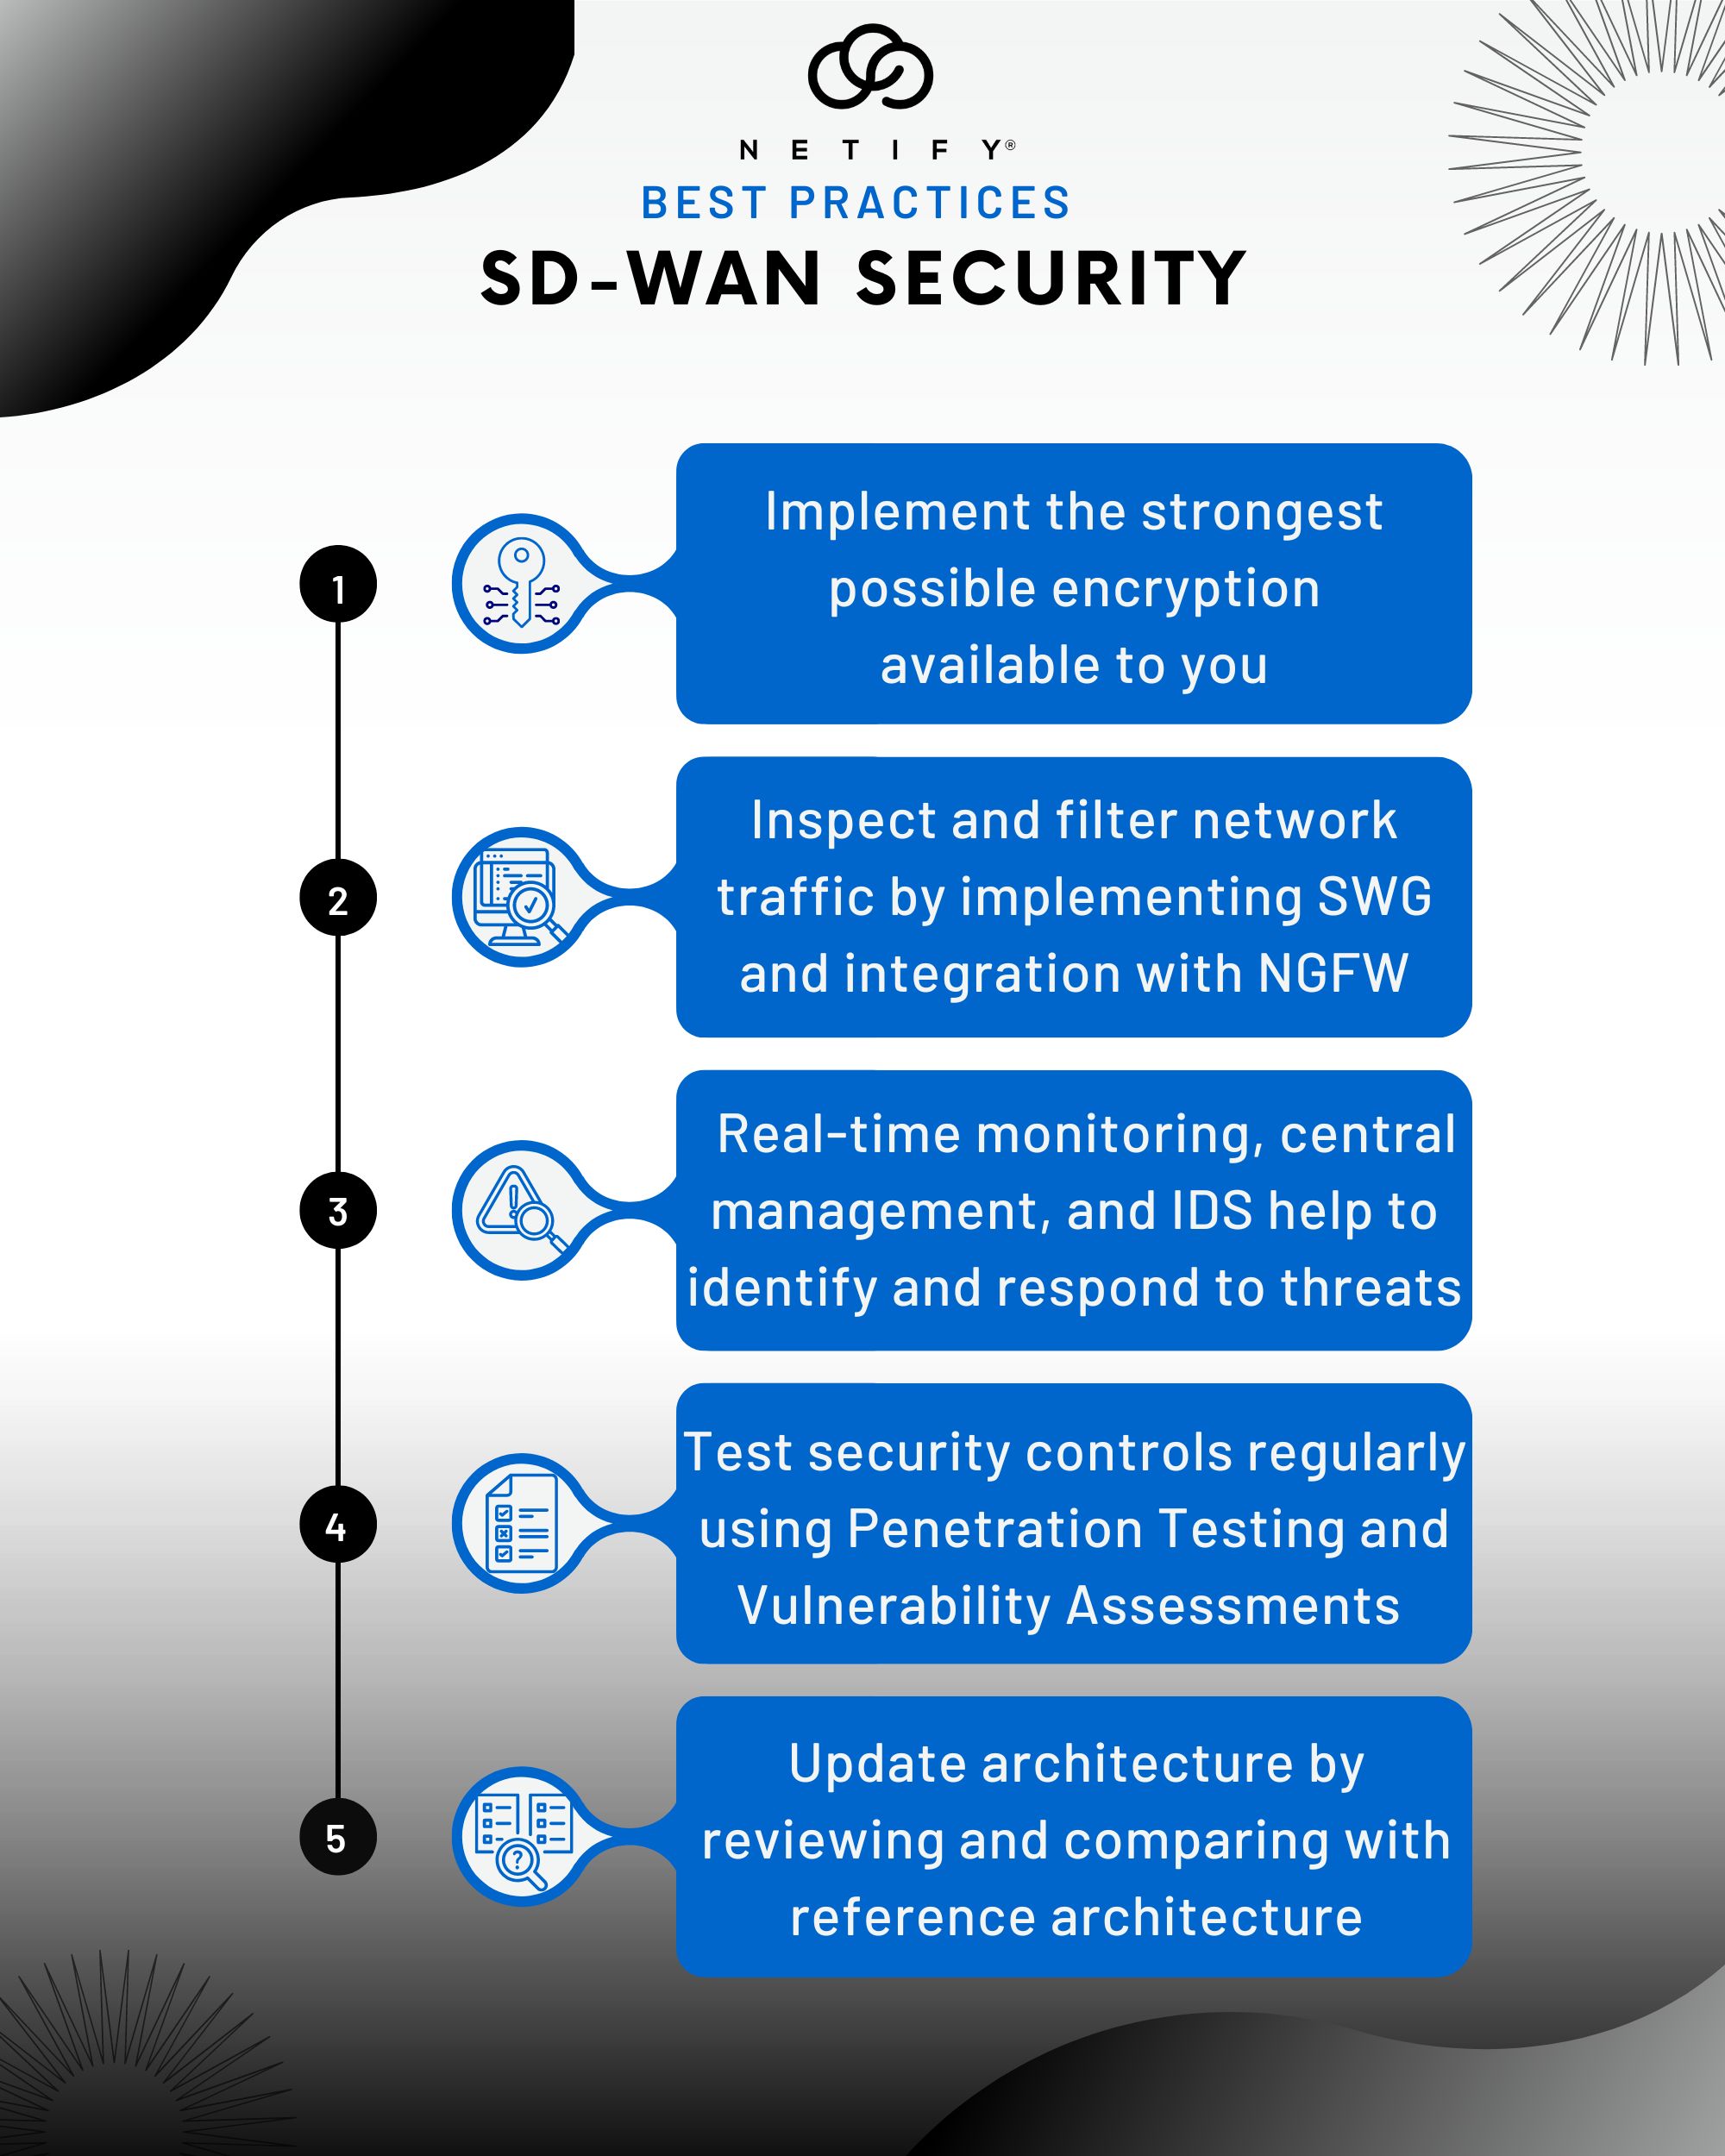 IT Decision Makers Guide to SD-WAN Security